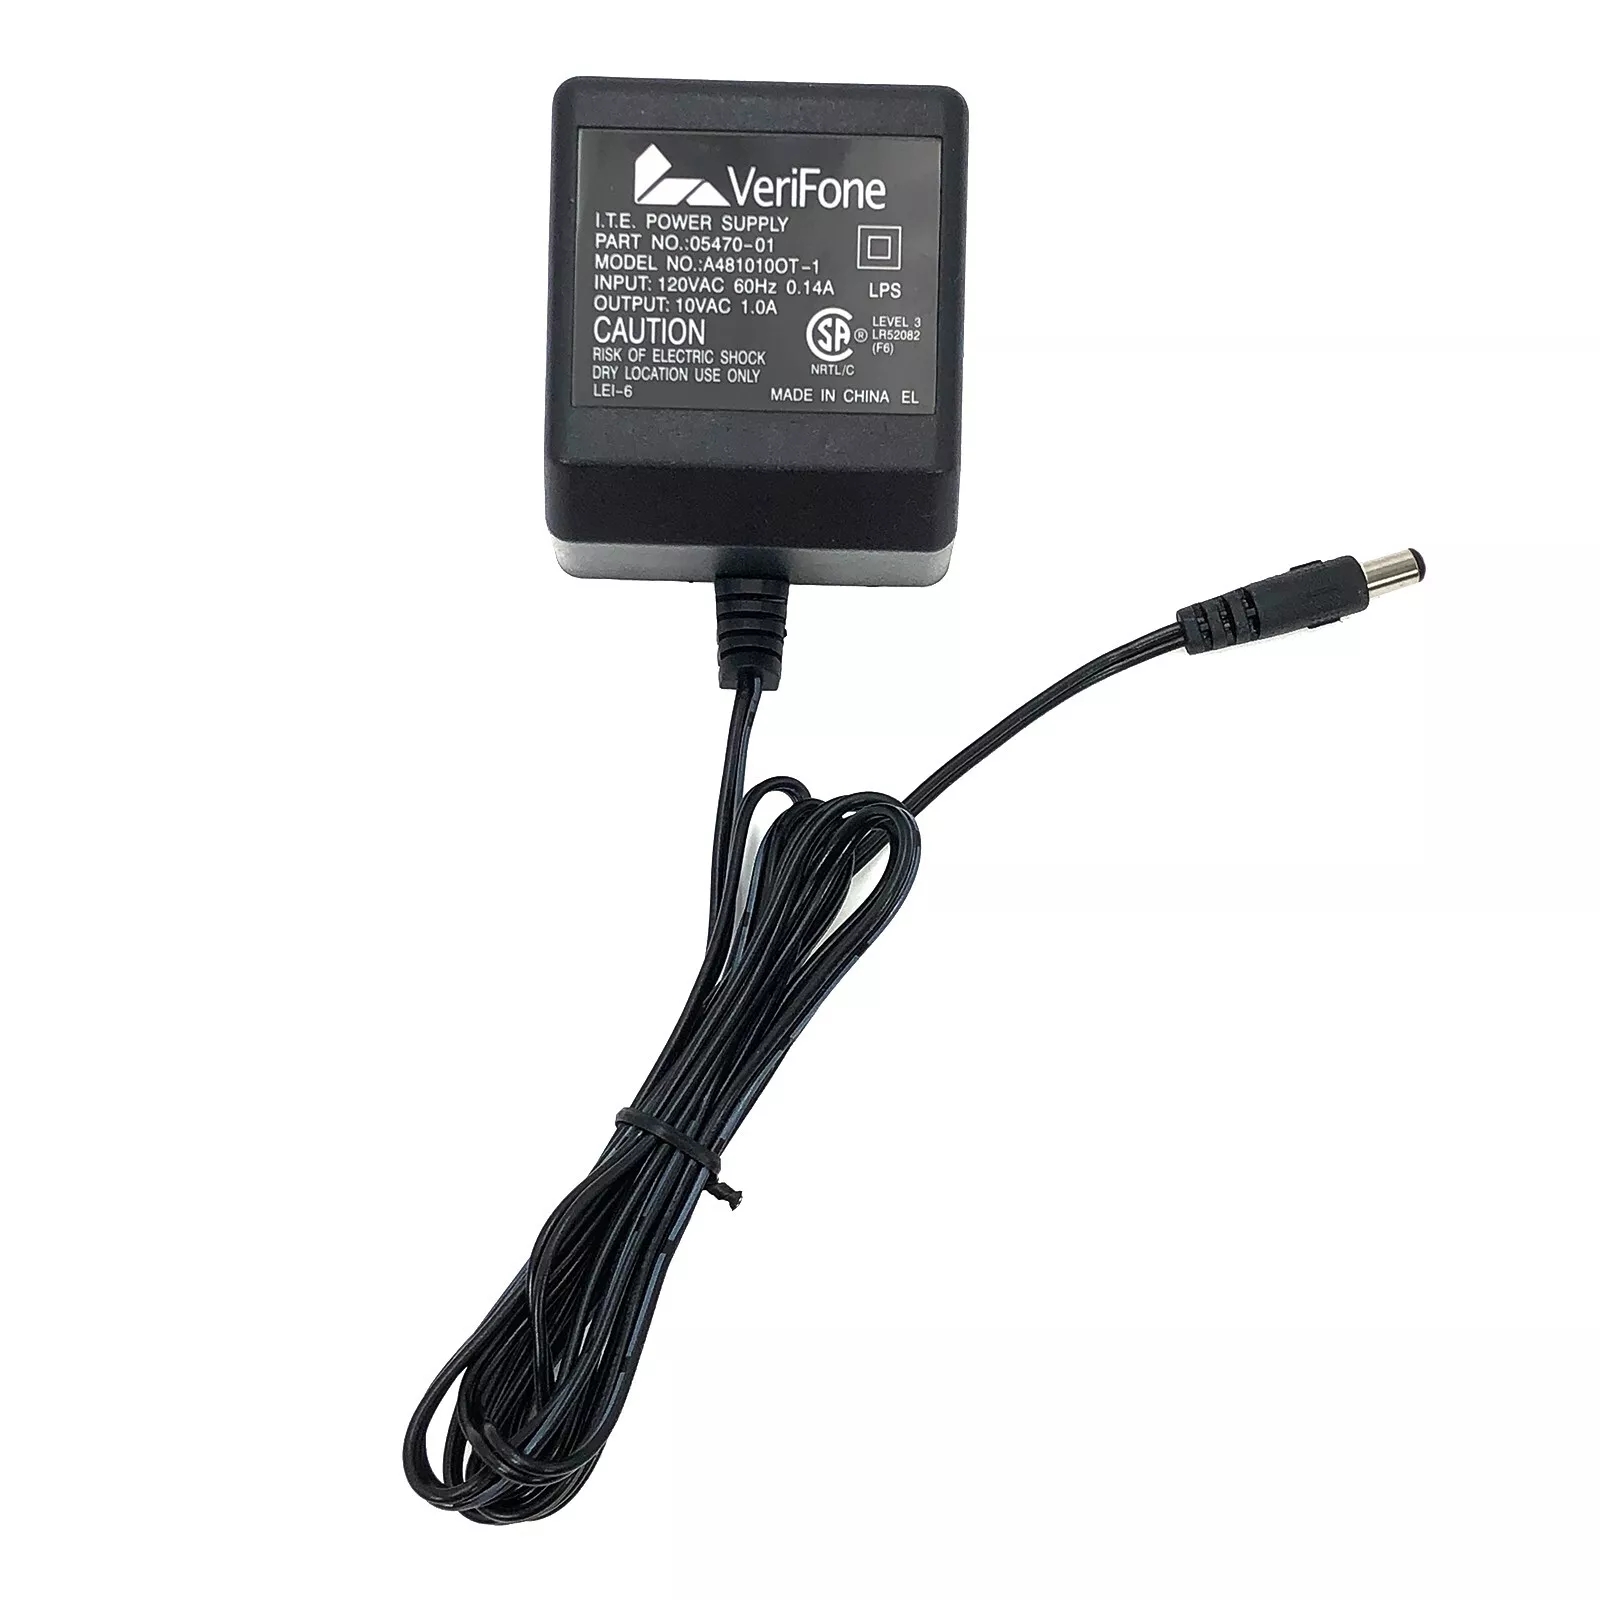 *Brand NEW*Genuine VeriFone A481010OT-1 10V 1A AC/DC Adapter with 5.5x2.1mm Power Supply